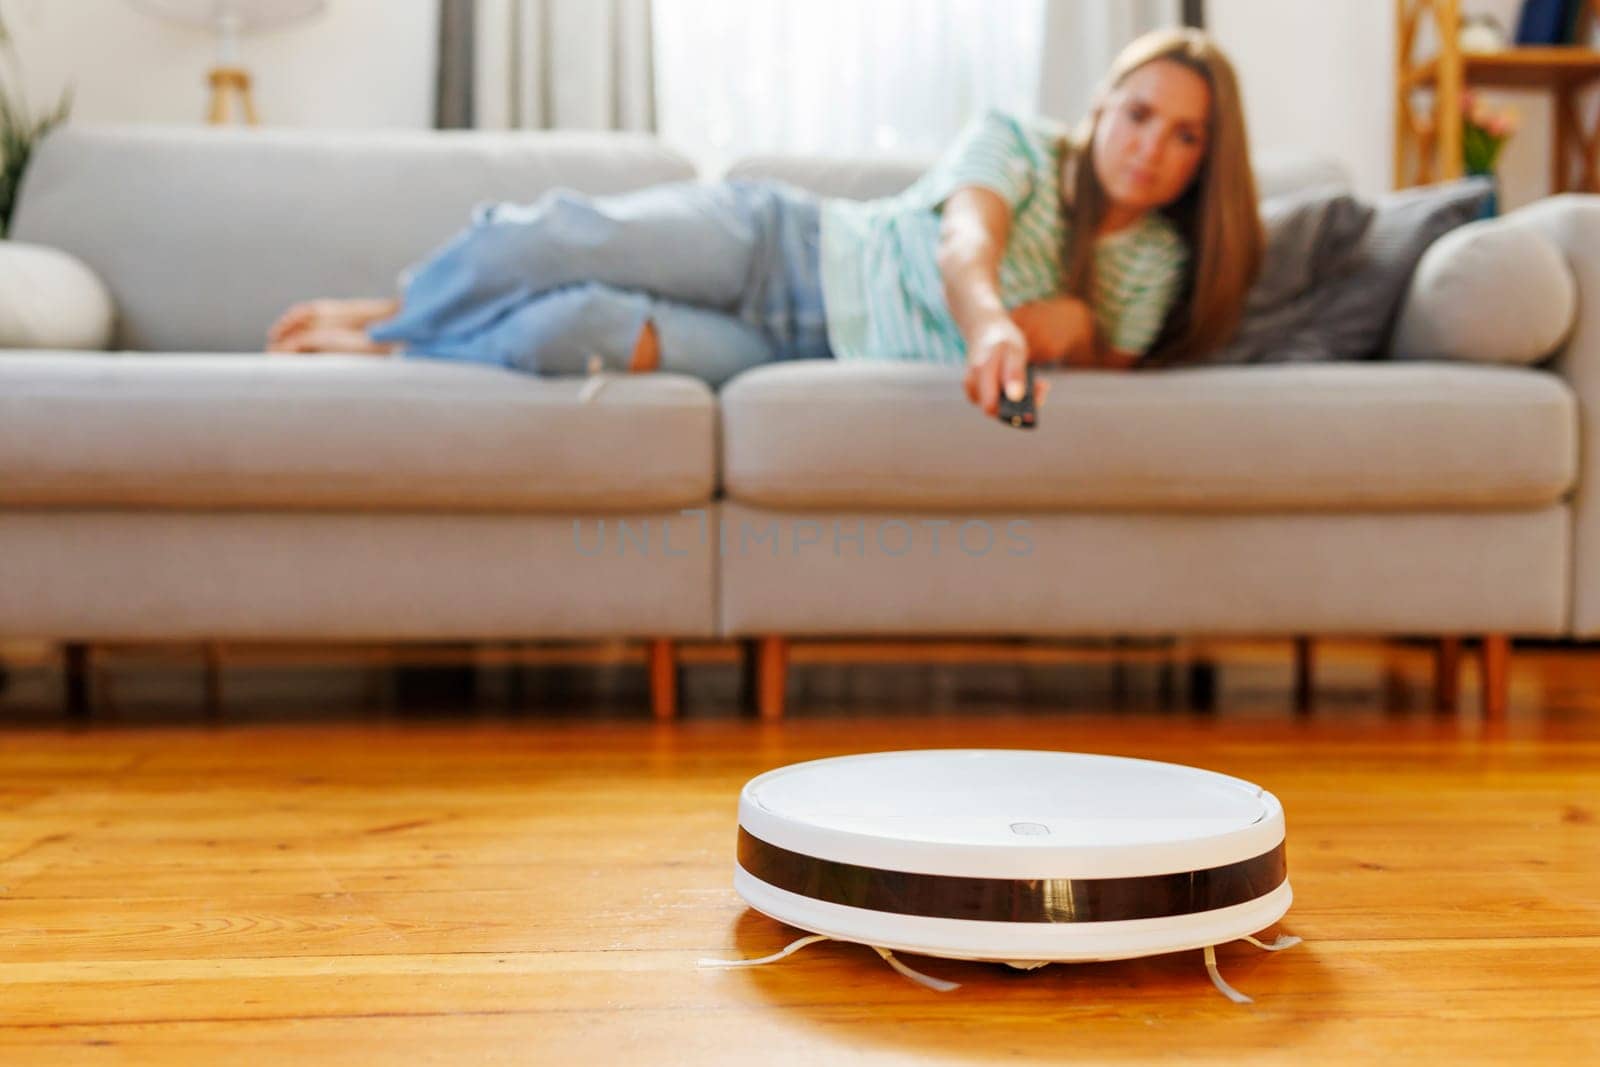 A young woman lounges on the sofa, using a remote control to navigate a robotic vacuum cleaner across the wooden floor of a cozy living room.